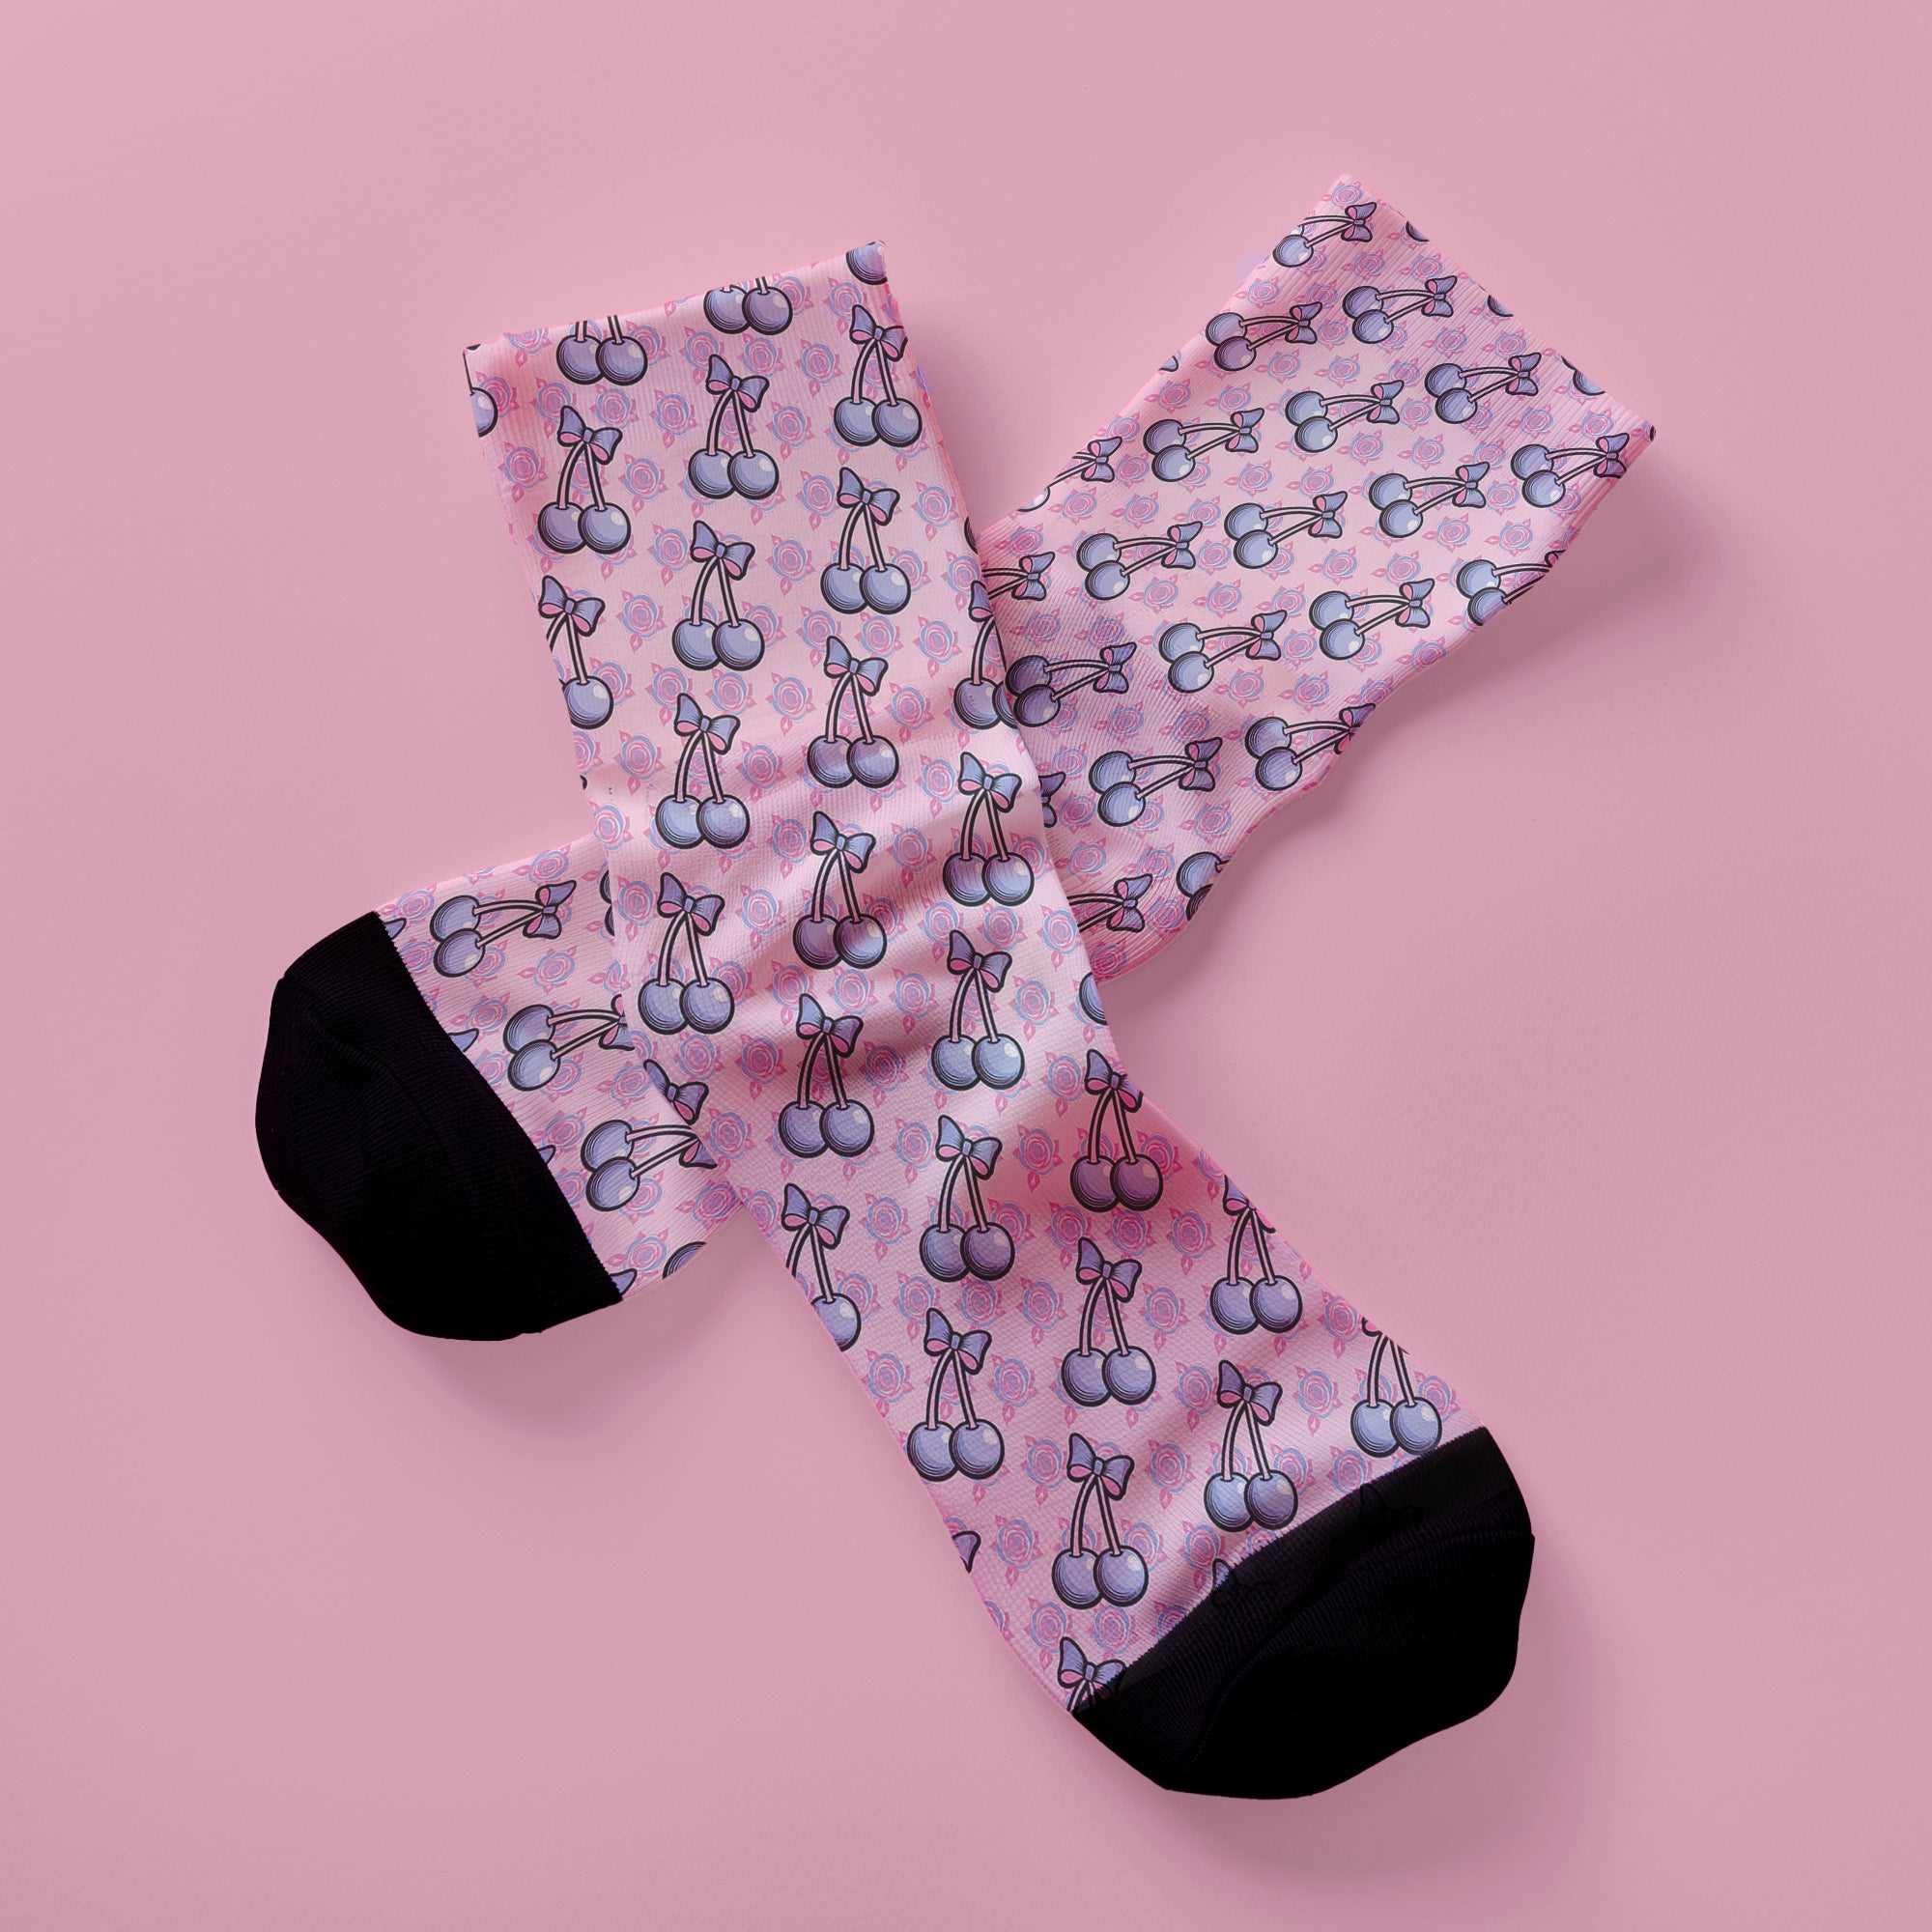 Fun and playful cherry bow-patterned pink socks with black heels and toes,  ideal for those who love quirky and cute designs